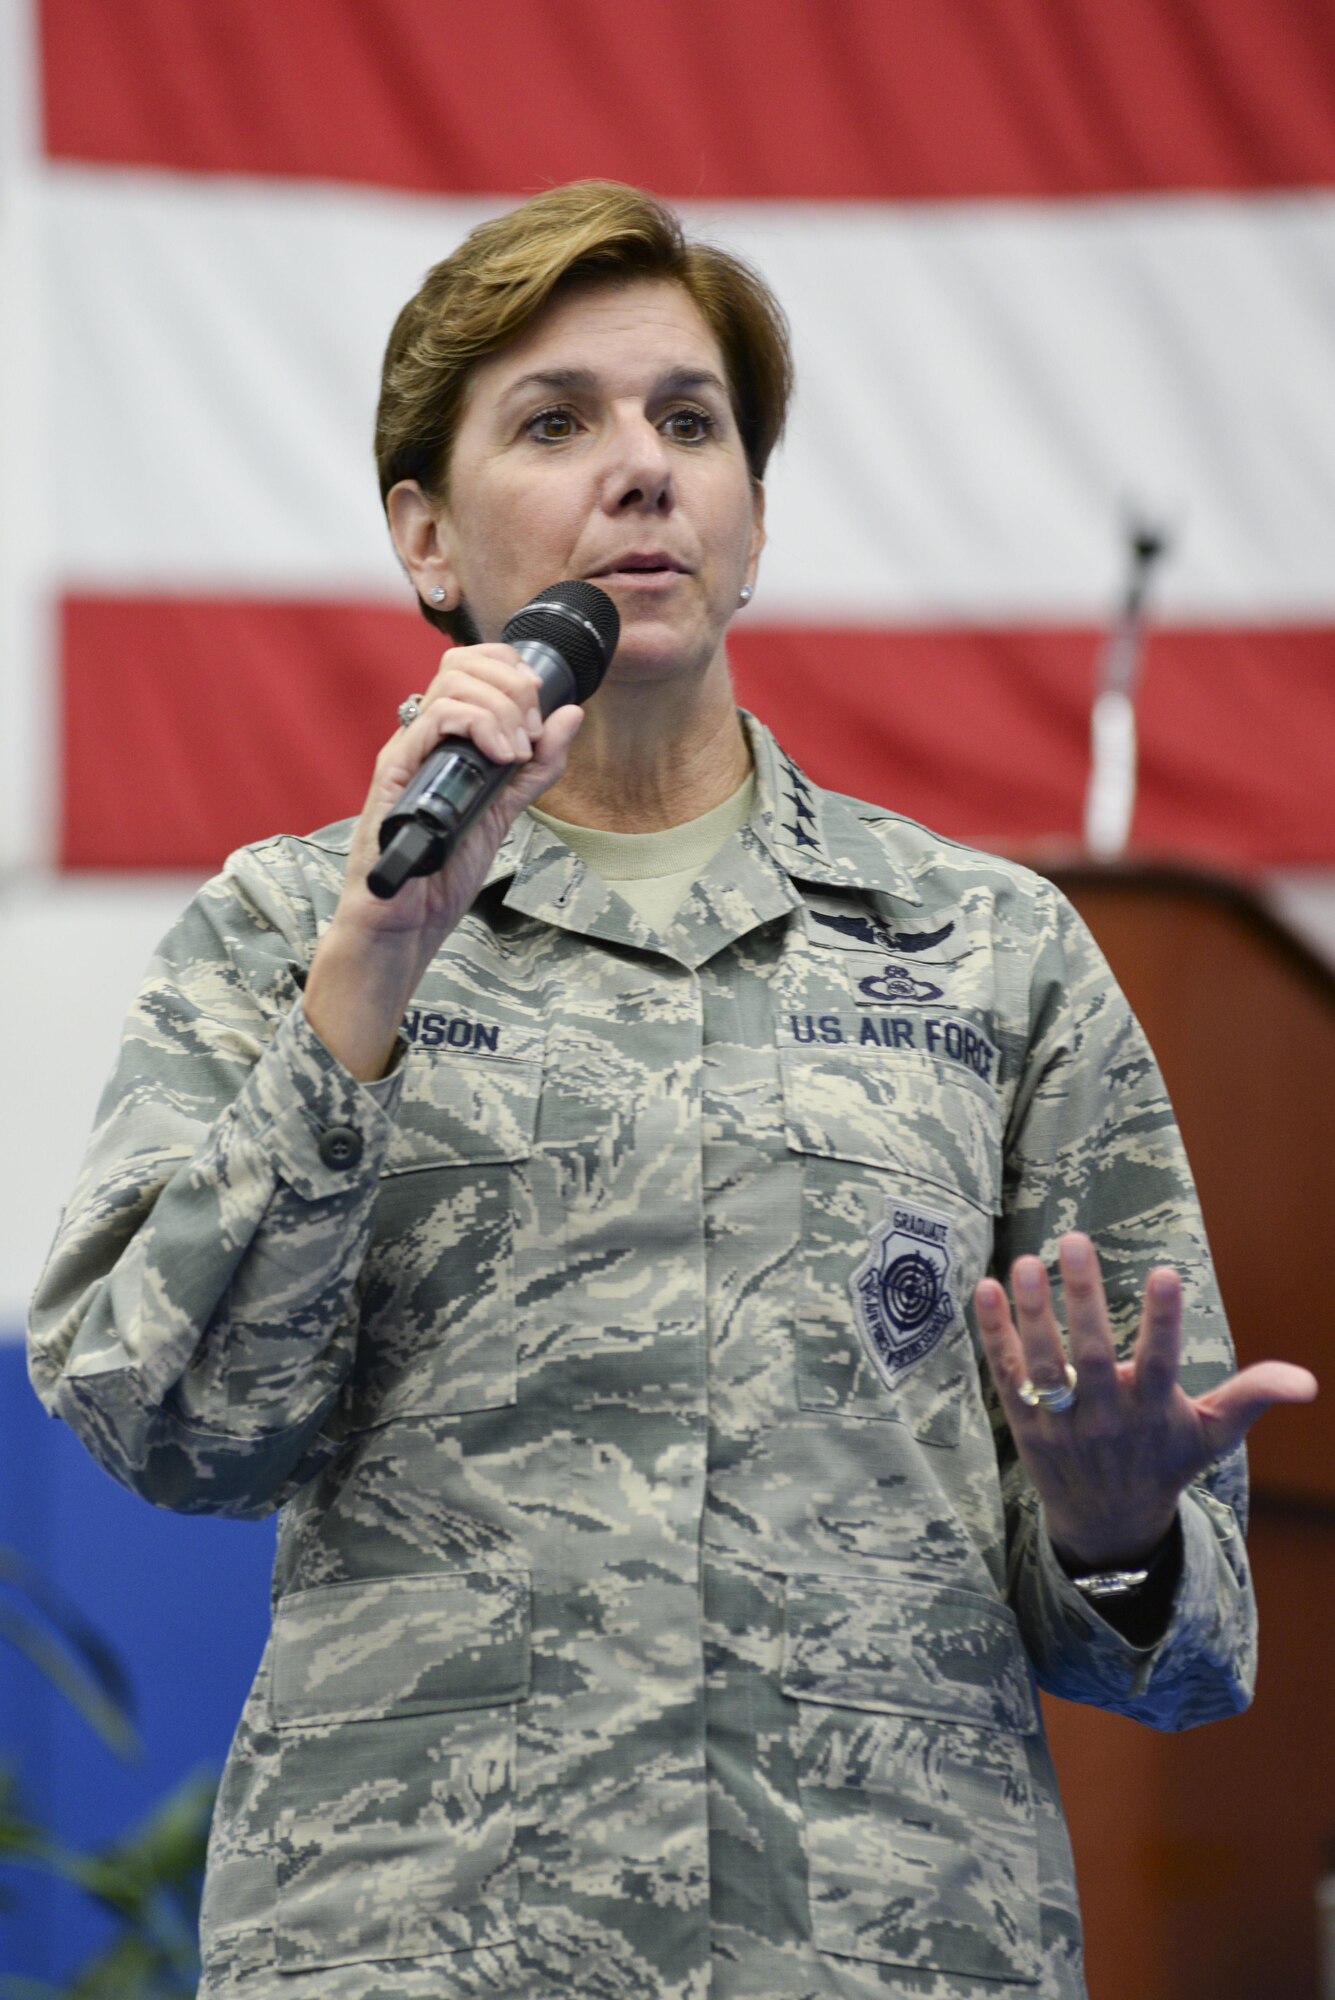 U.S. Air Force Gen. Lori Robinson, Pacific Air Forces commander, addresses Airmen during an all-call, July 10, 2015, at Andersen Air Force Base, Guam. Robinson outlined her priorities including taking care of Airmen and their families while accomplishing the mission. (U.S. Air Force photo by Senior Airman Katrina M. Brisbin/Released)